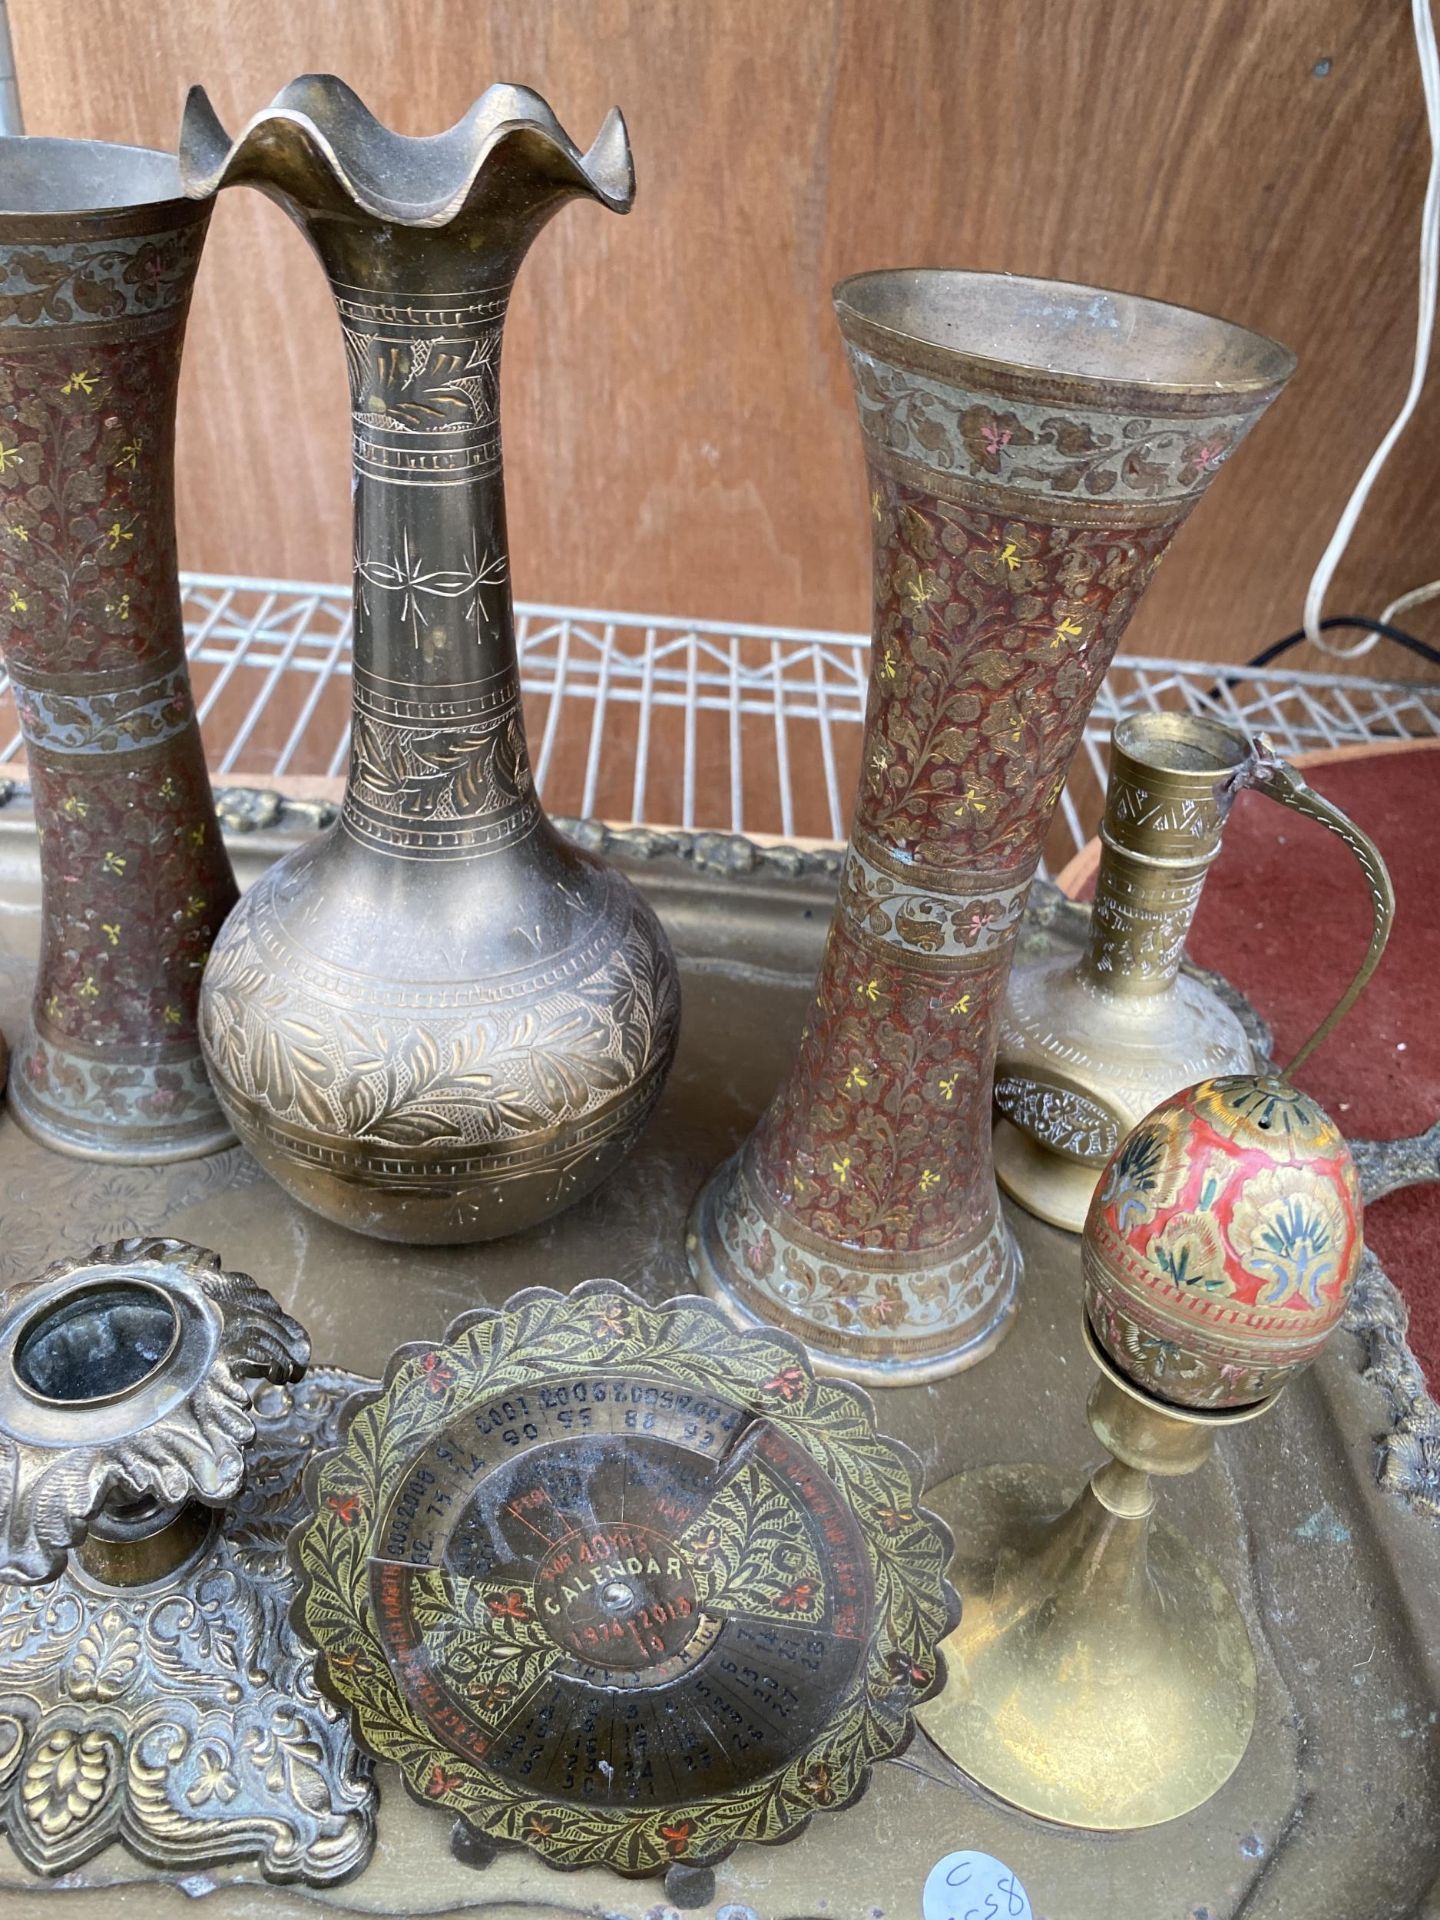 AN ASSORTMENT OF VINTAGE AND DECORATIVE BRASS WARE TO INCLUDE A TRAY, CANDLESTICKS AND CLOISONNE - Image 4 of 9